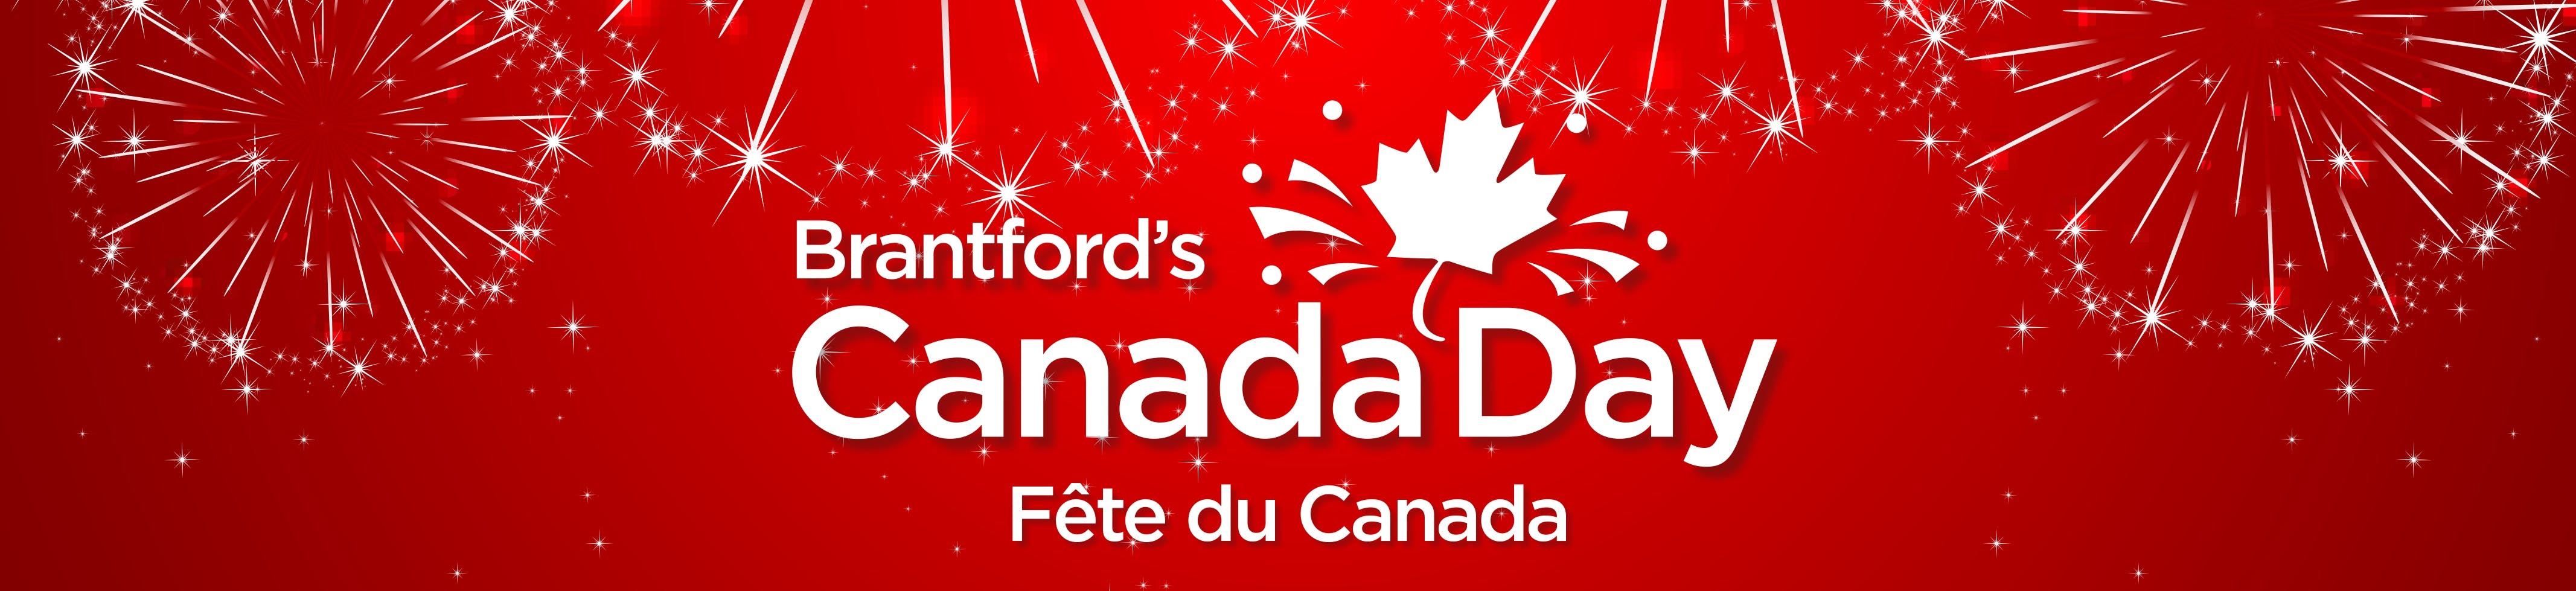 Brantford's Canada Day Fete du Canada and fireworks